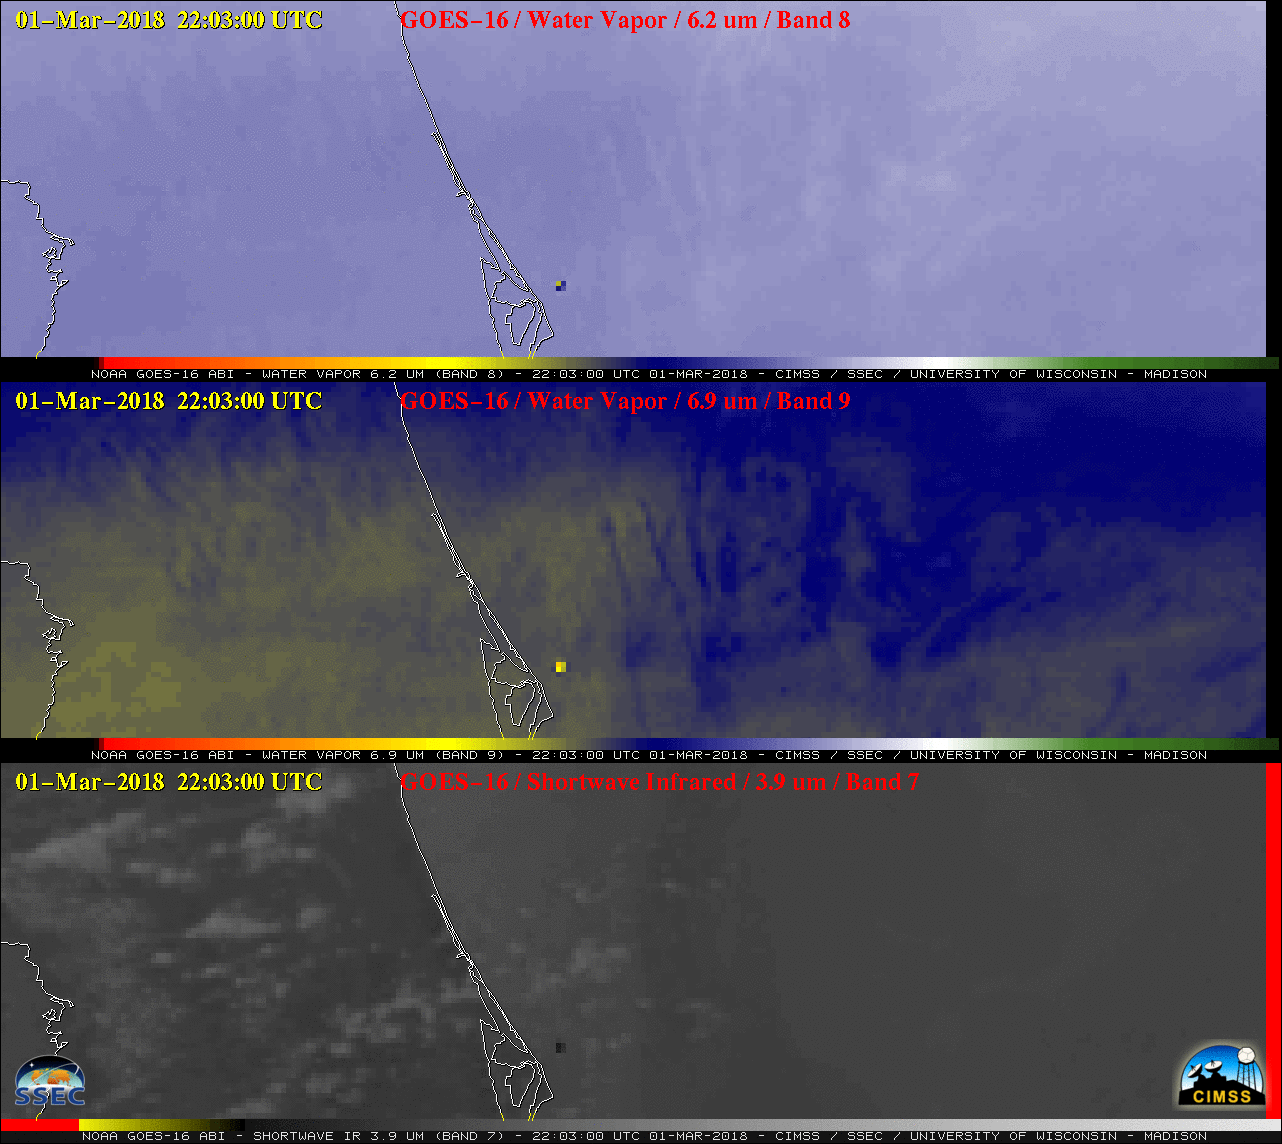 GOES-16 Upper-level (6.2 µm, top), Mid-level (6.9 µm, middle) and Shortwave Infrared (3.9 µm, bottom) image [click to enlarge]